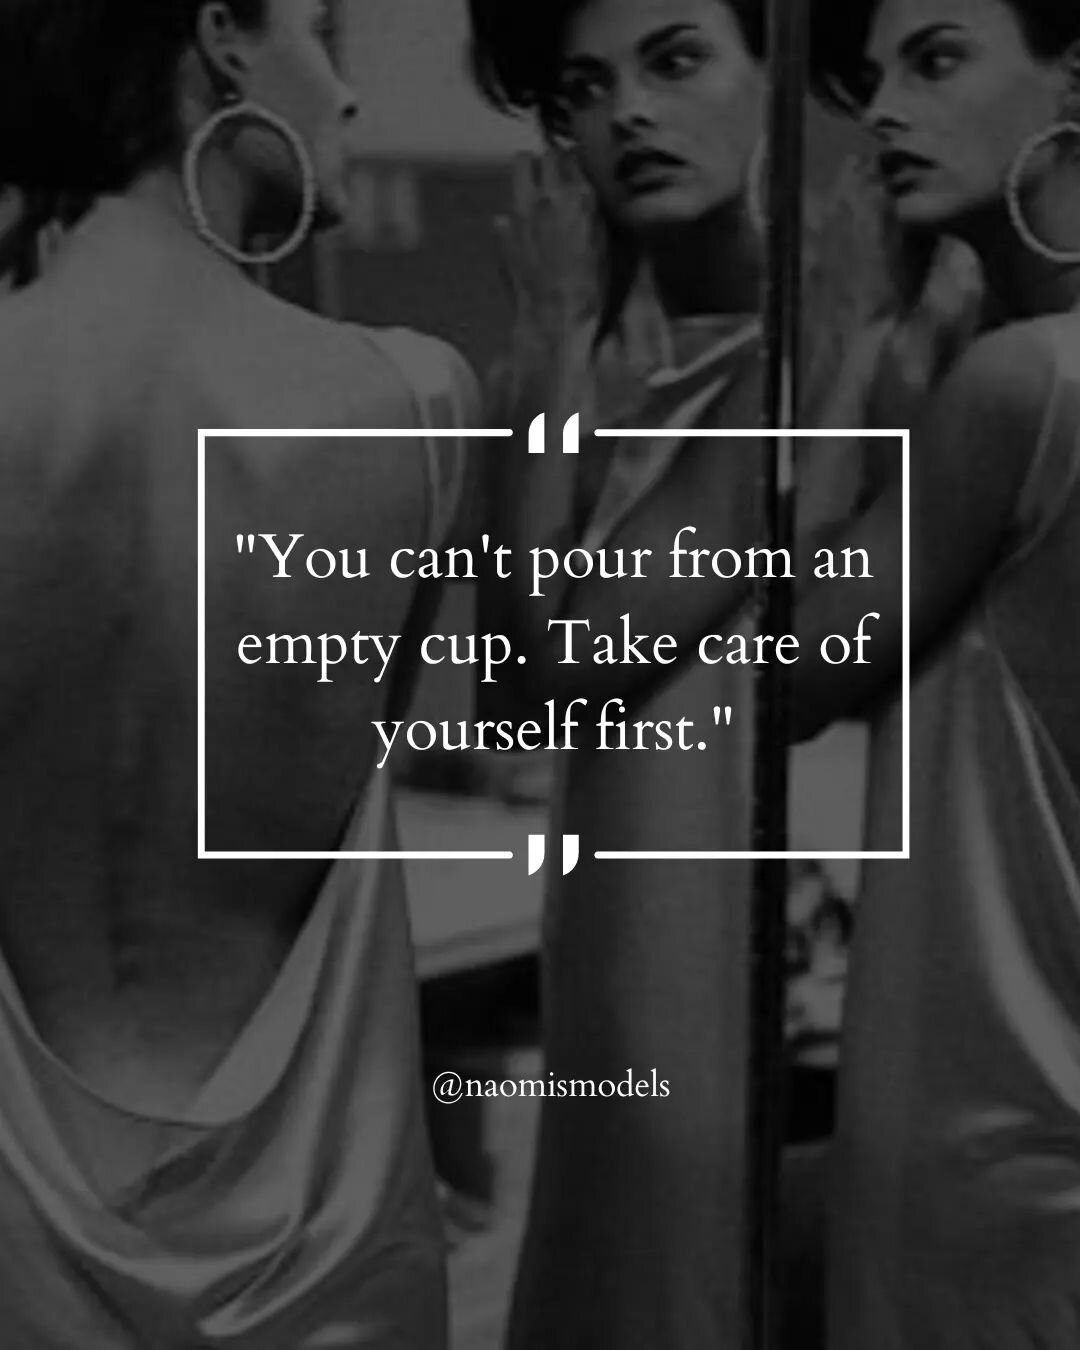 &quot;You can't pour from an empty cup. Take care of yourself first.&quot;

#naomismodels #quoteoftheday #inspiration #motivation #models #nycmodels #castingagency #modelscout #selflove #selfcare